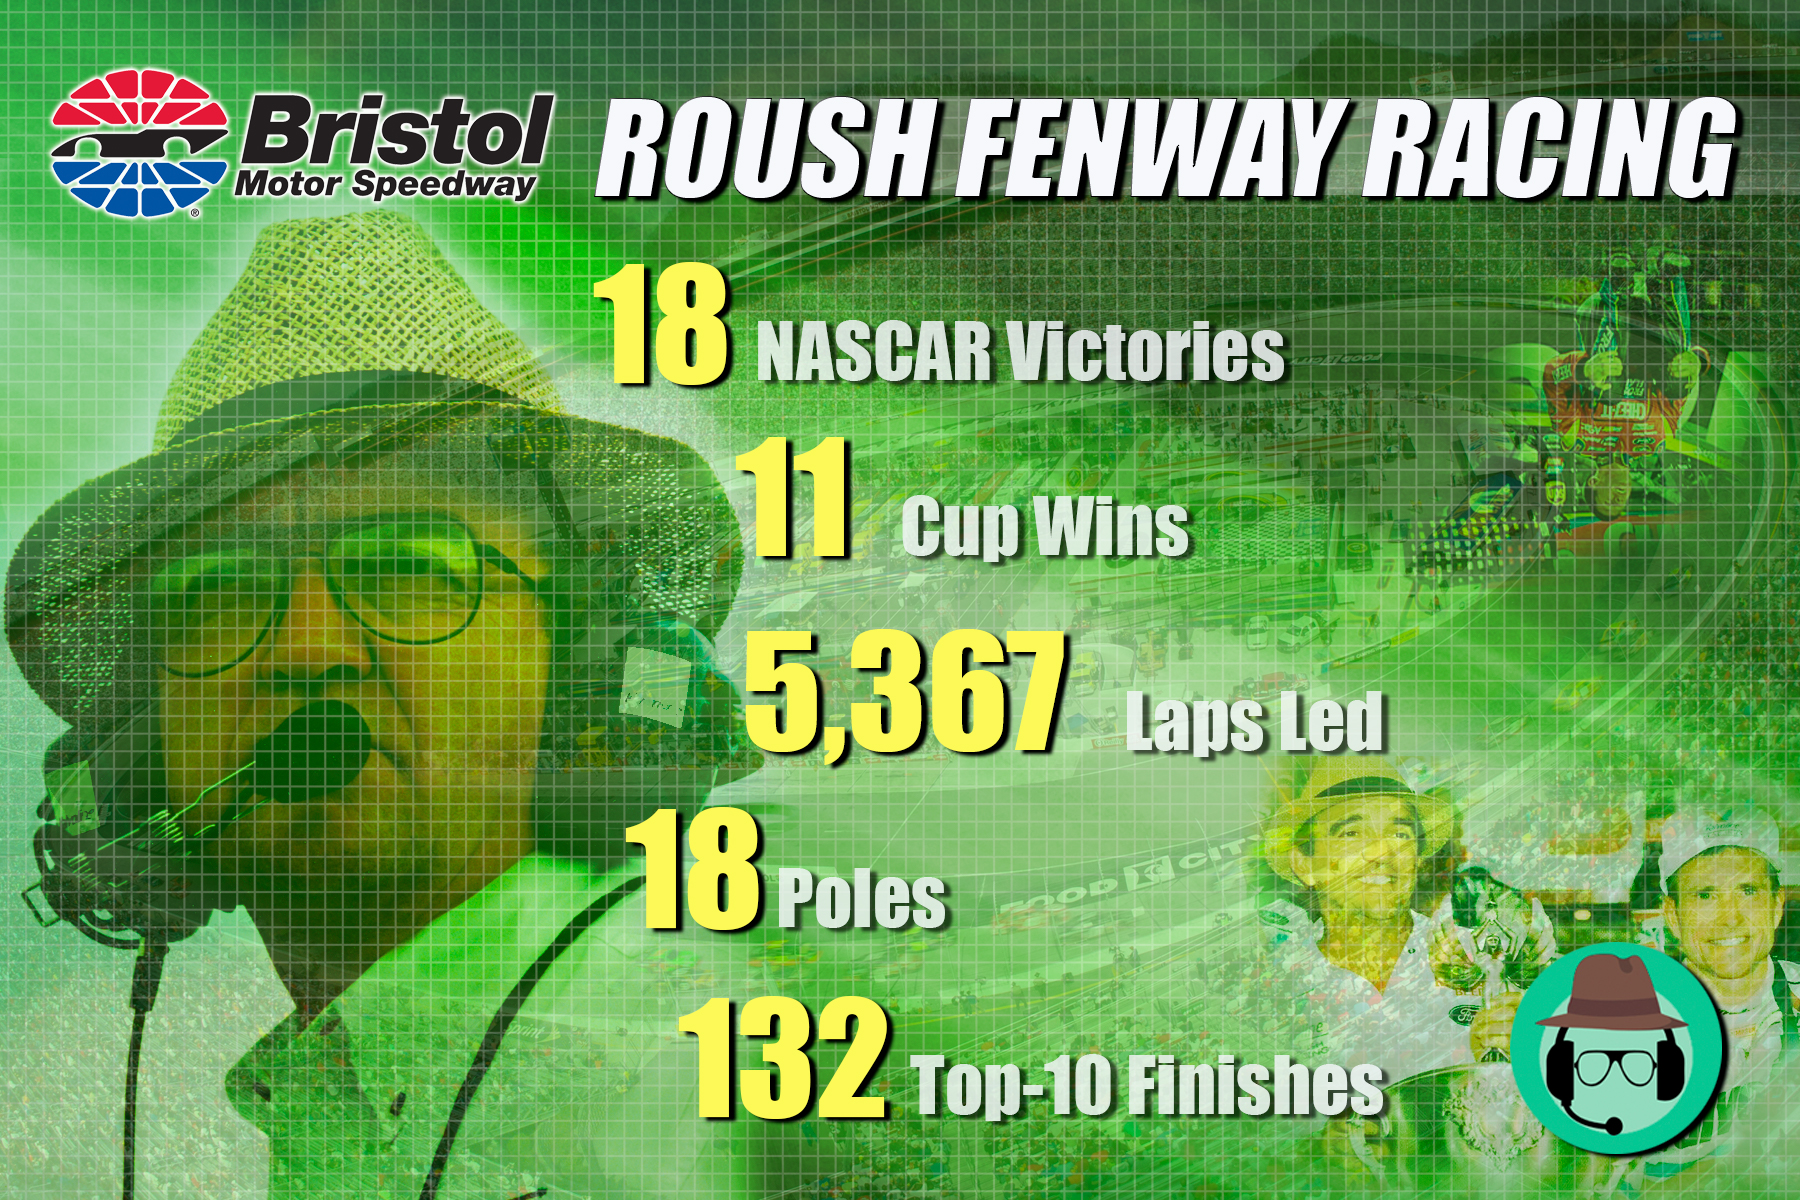 ROUSH FENWAY HAS EXCELLED AT THUNDER VALLEY